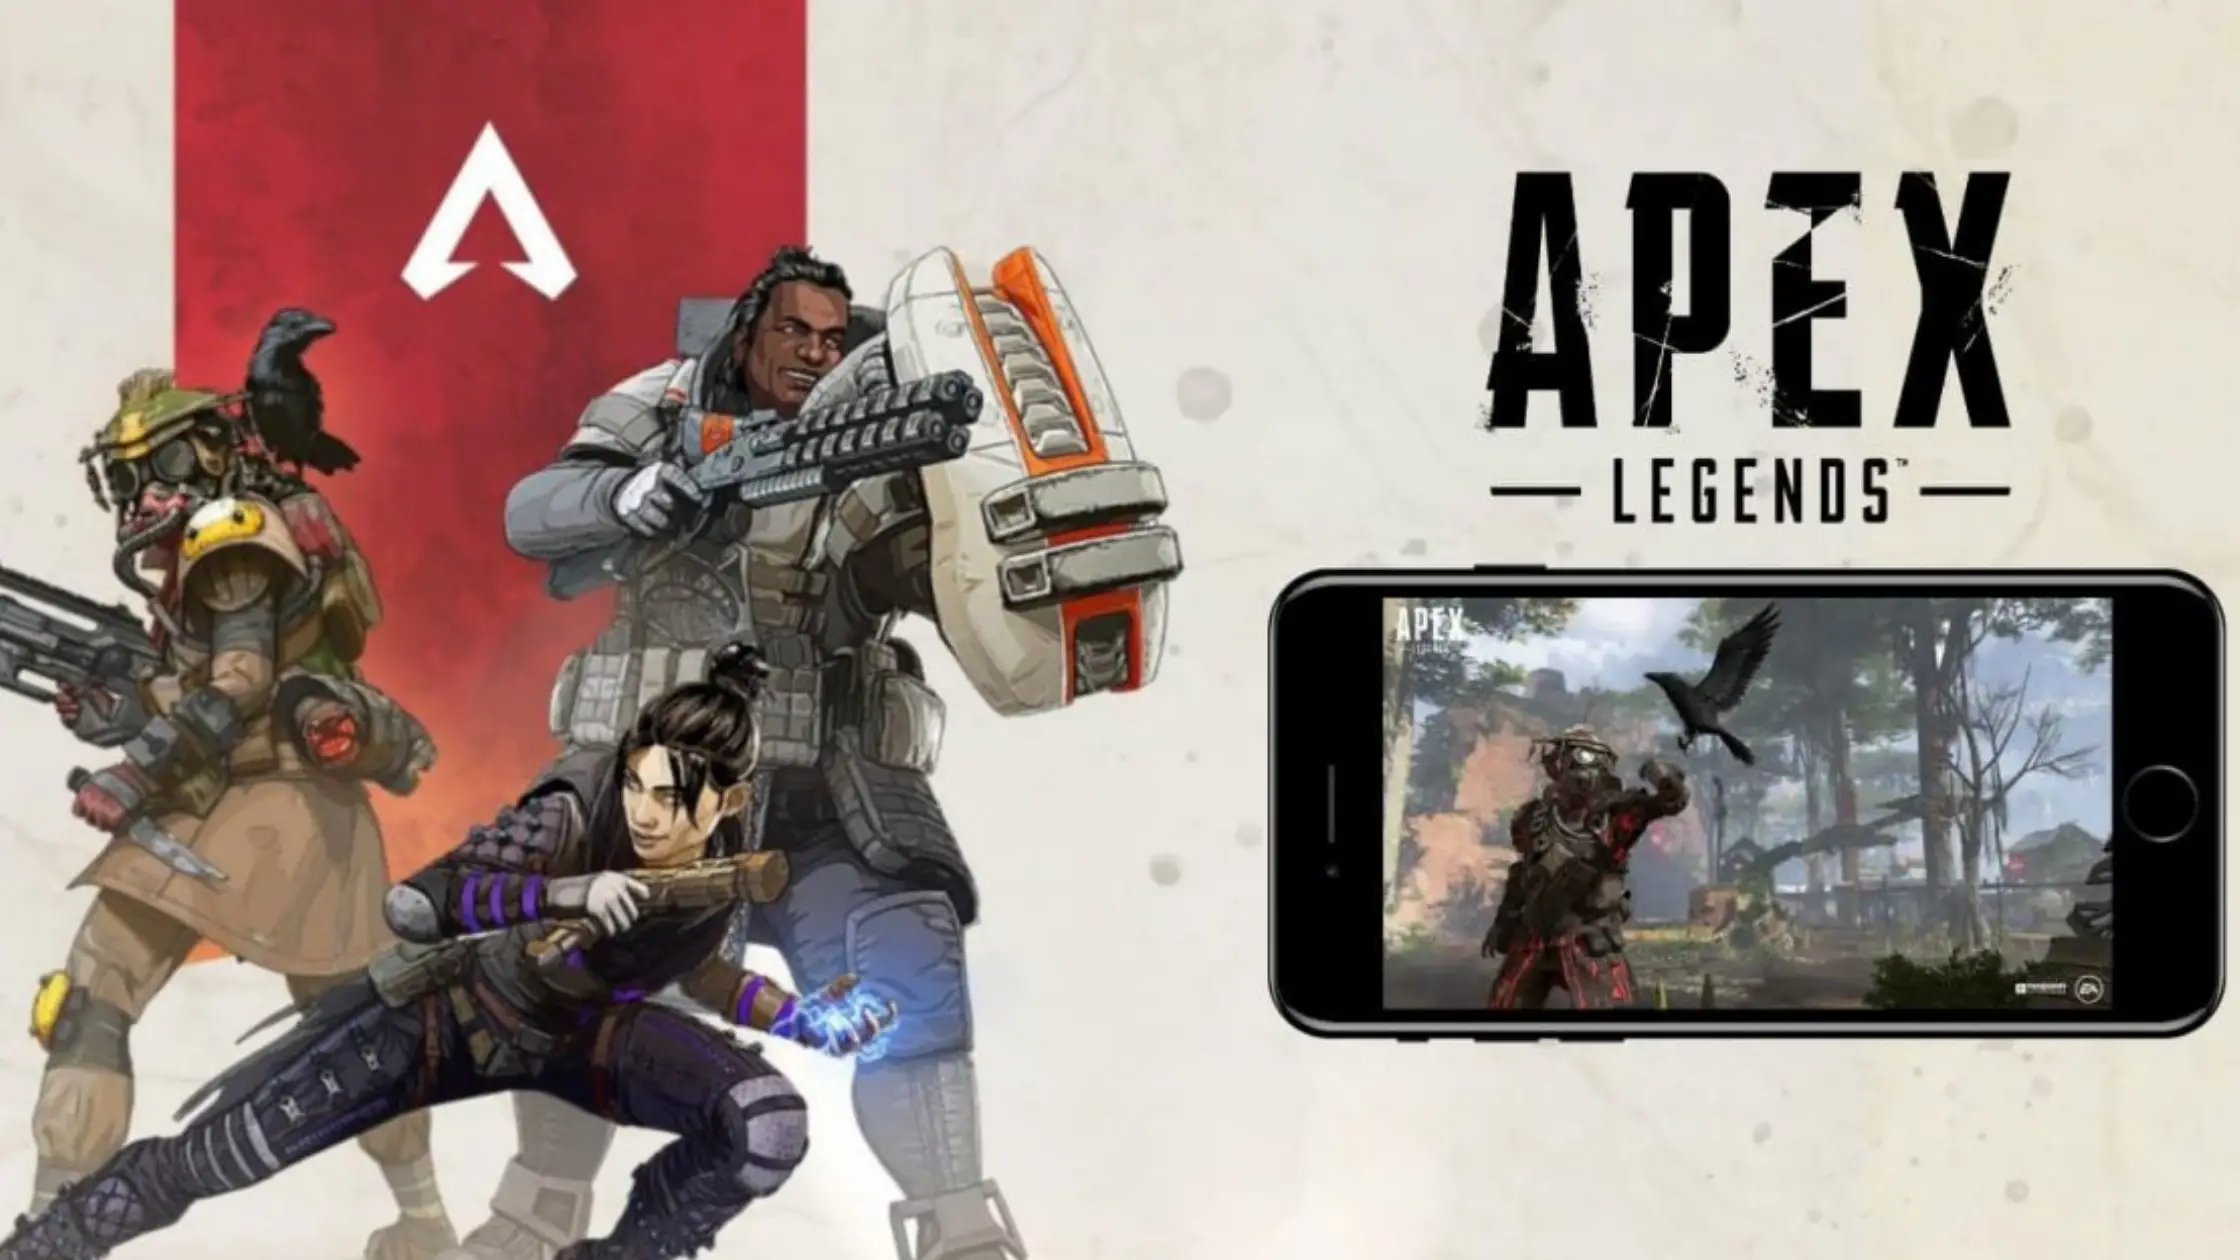 apex-legends-mobile-version-to-drop-soon-according-to-job-listings